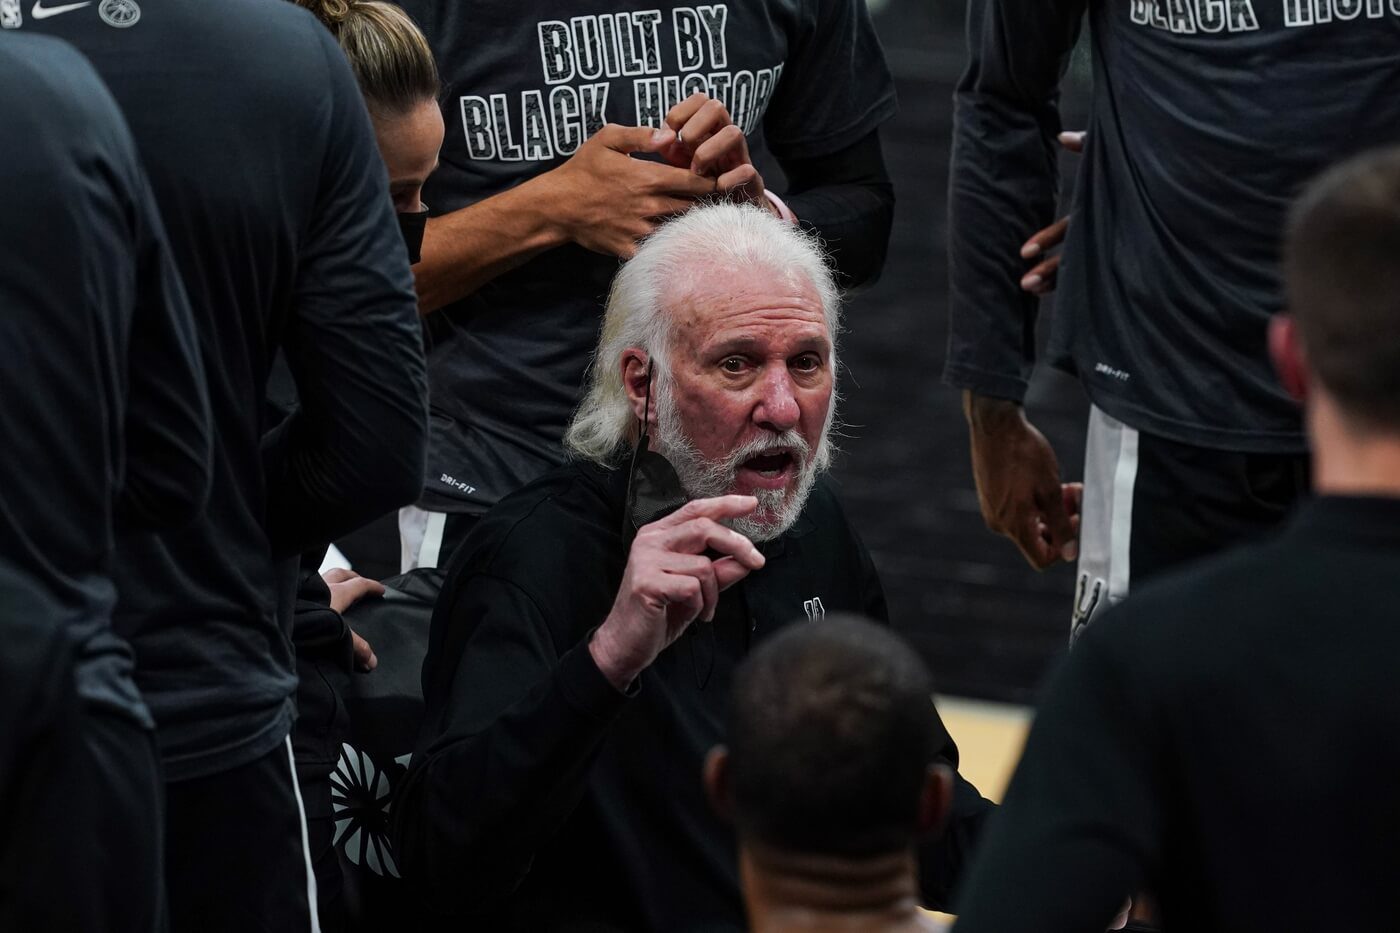 Feb 27, 2021; San Antonio, Texas, USA; San Antonio Spurs head coach Gregg Popovich talks to his team in the second against the New Orleans Pelicans at the AT&T Center. Mandatory Credit: Daniel Dunn-USA TODAY Sports